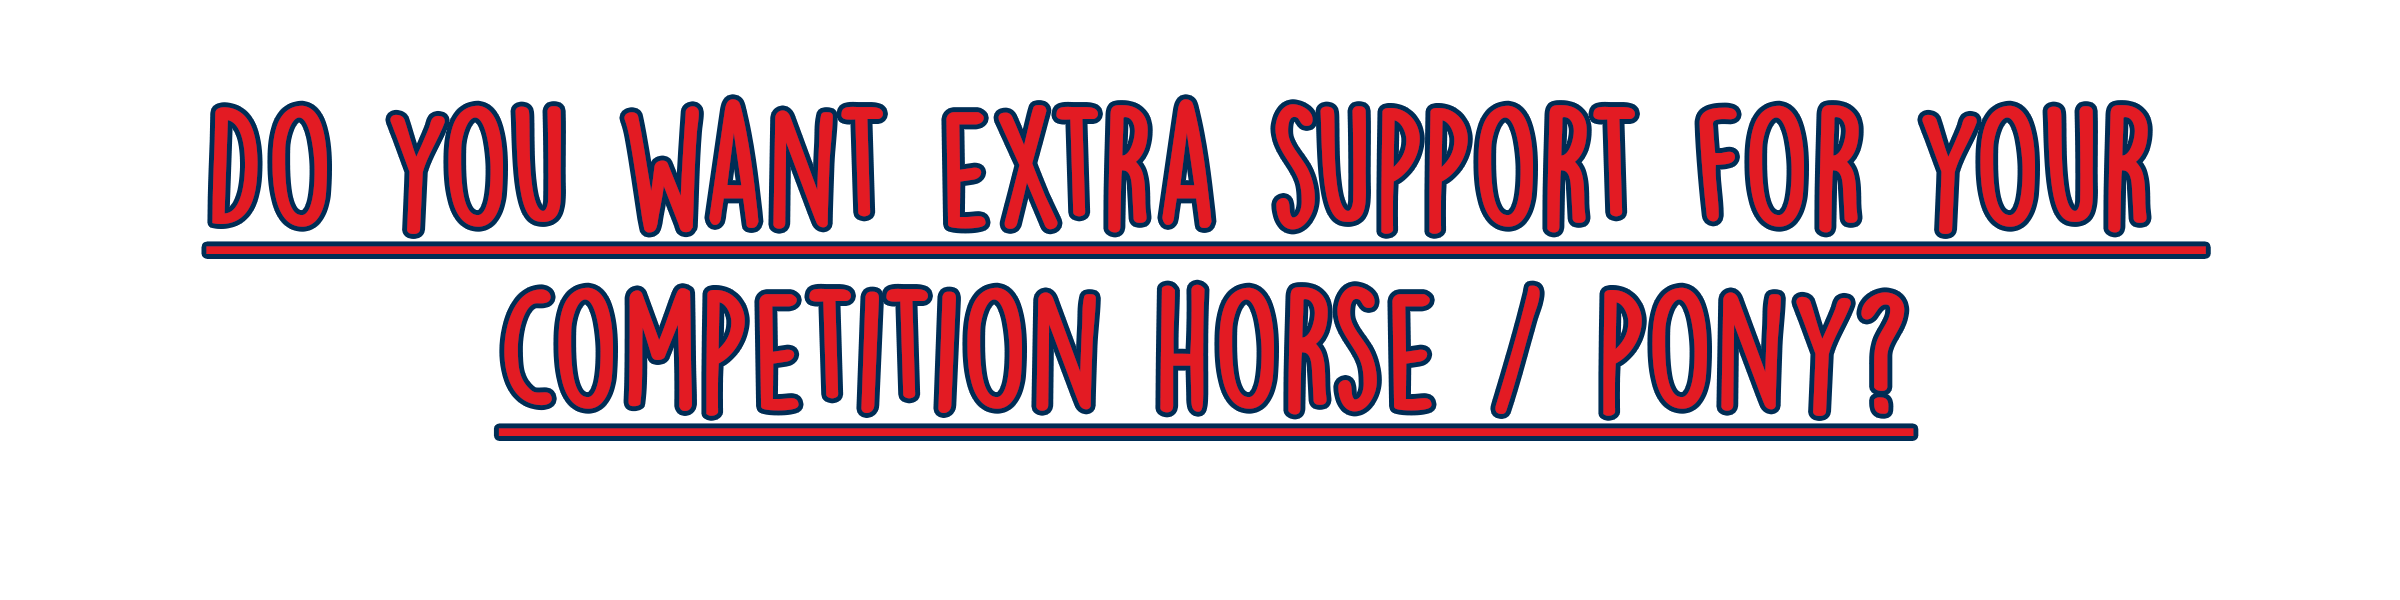 support-comp-horse.png